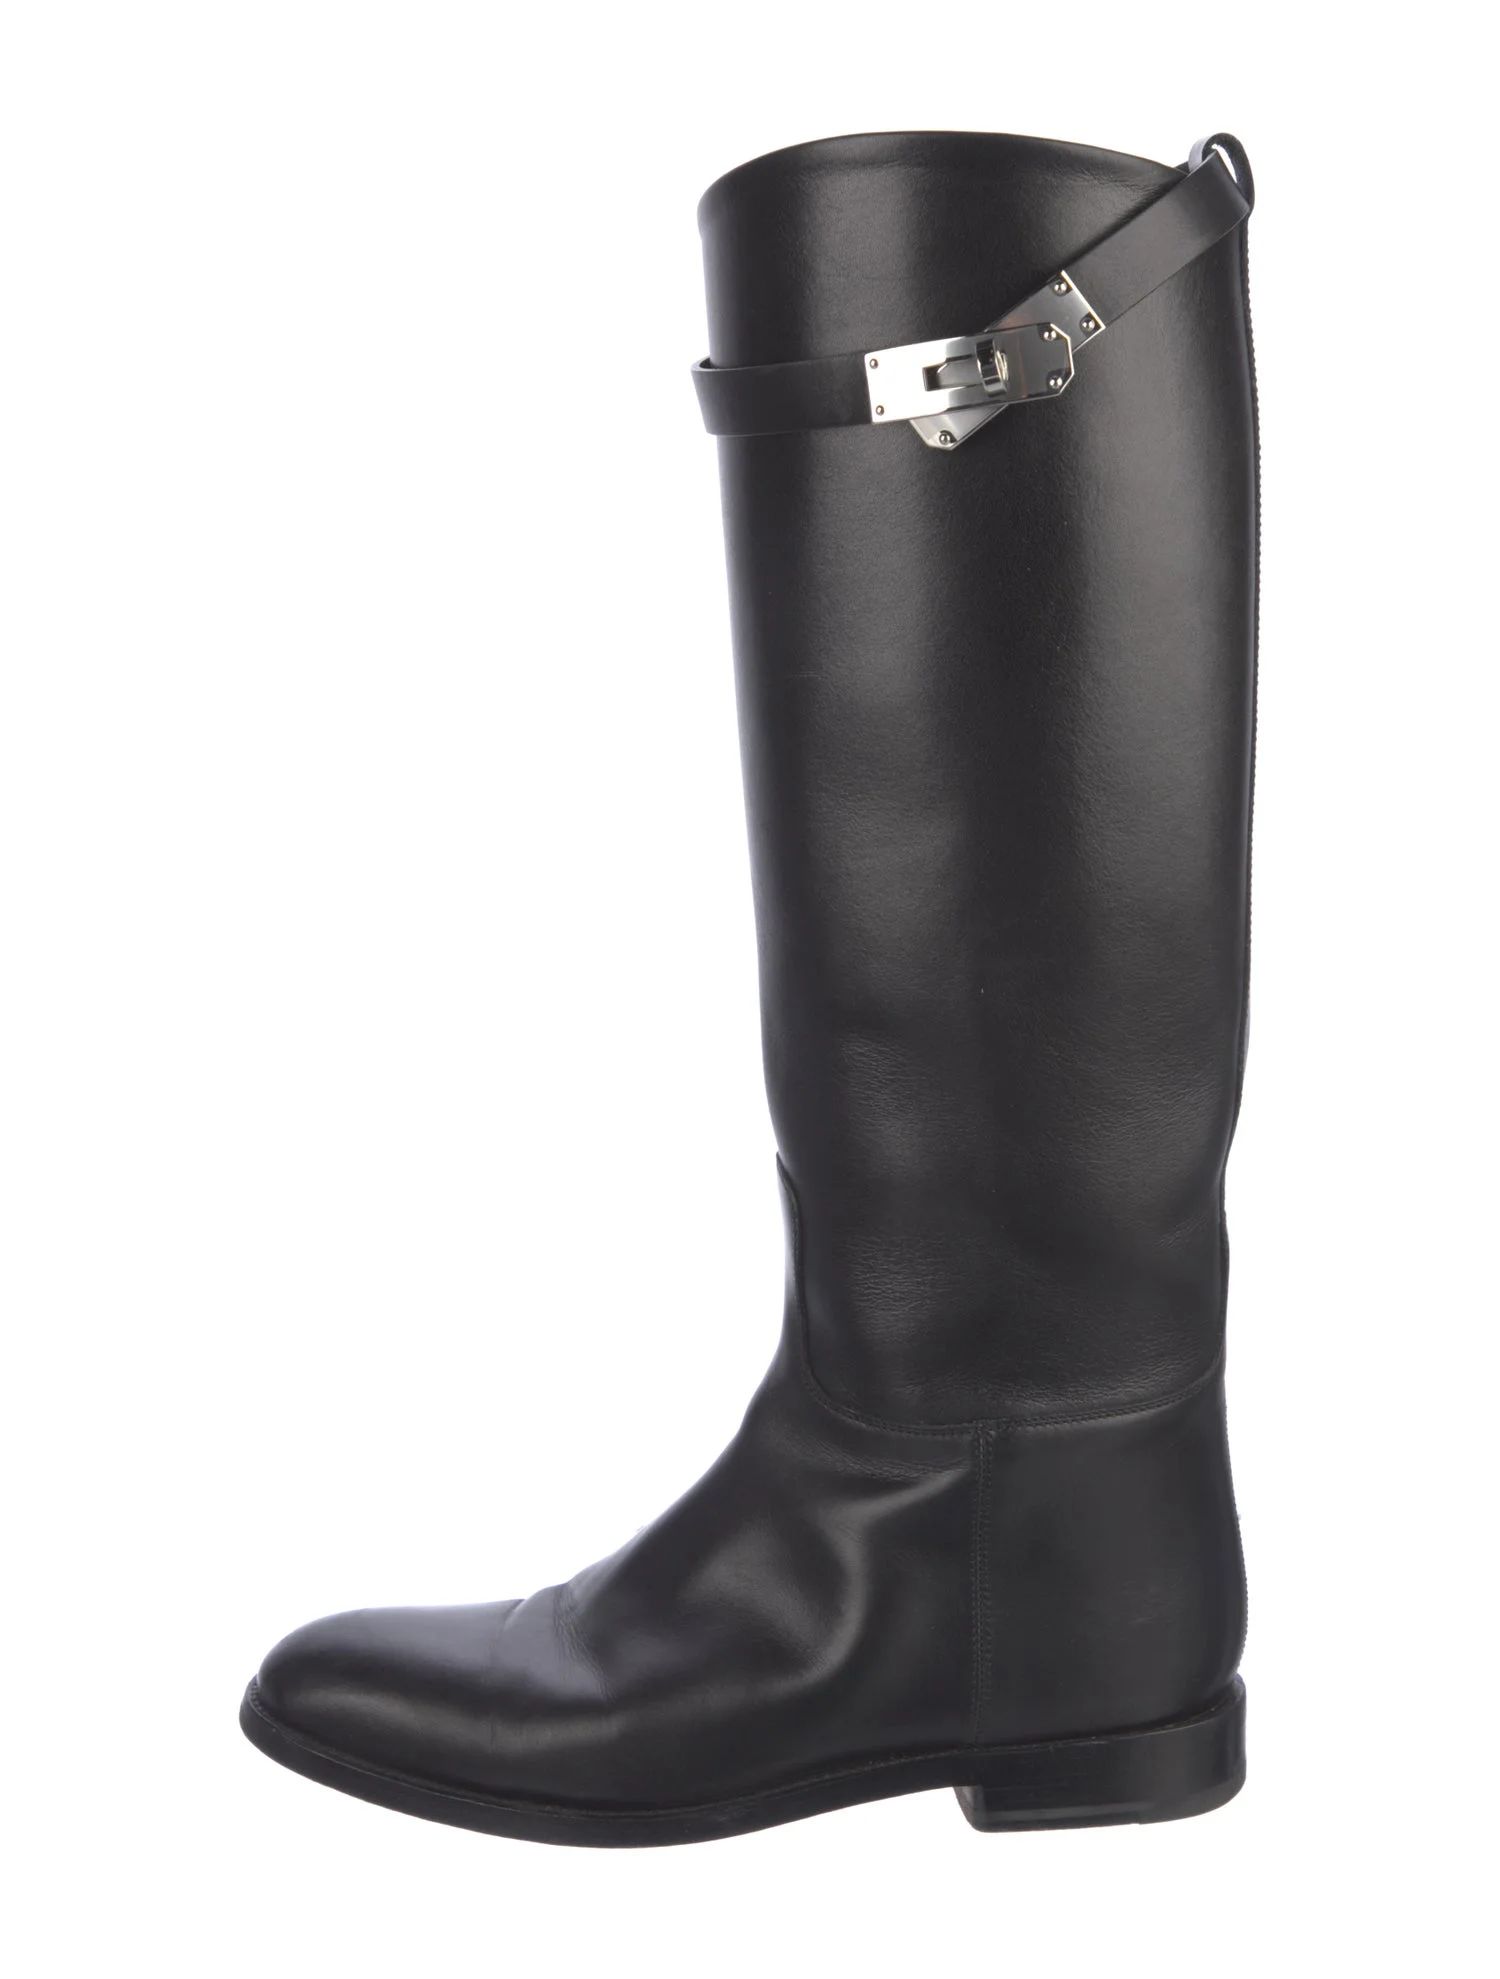 Leather Riding Boots | The RealReal